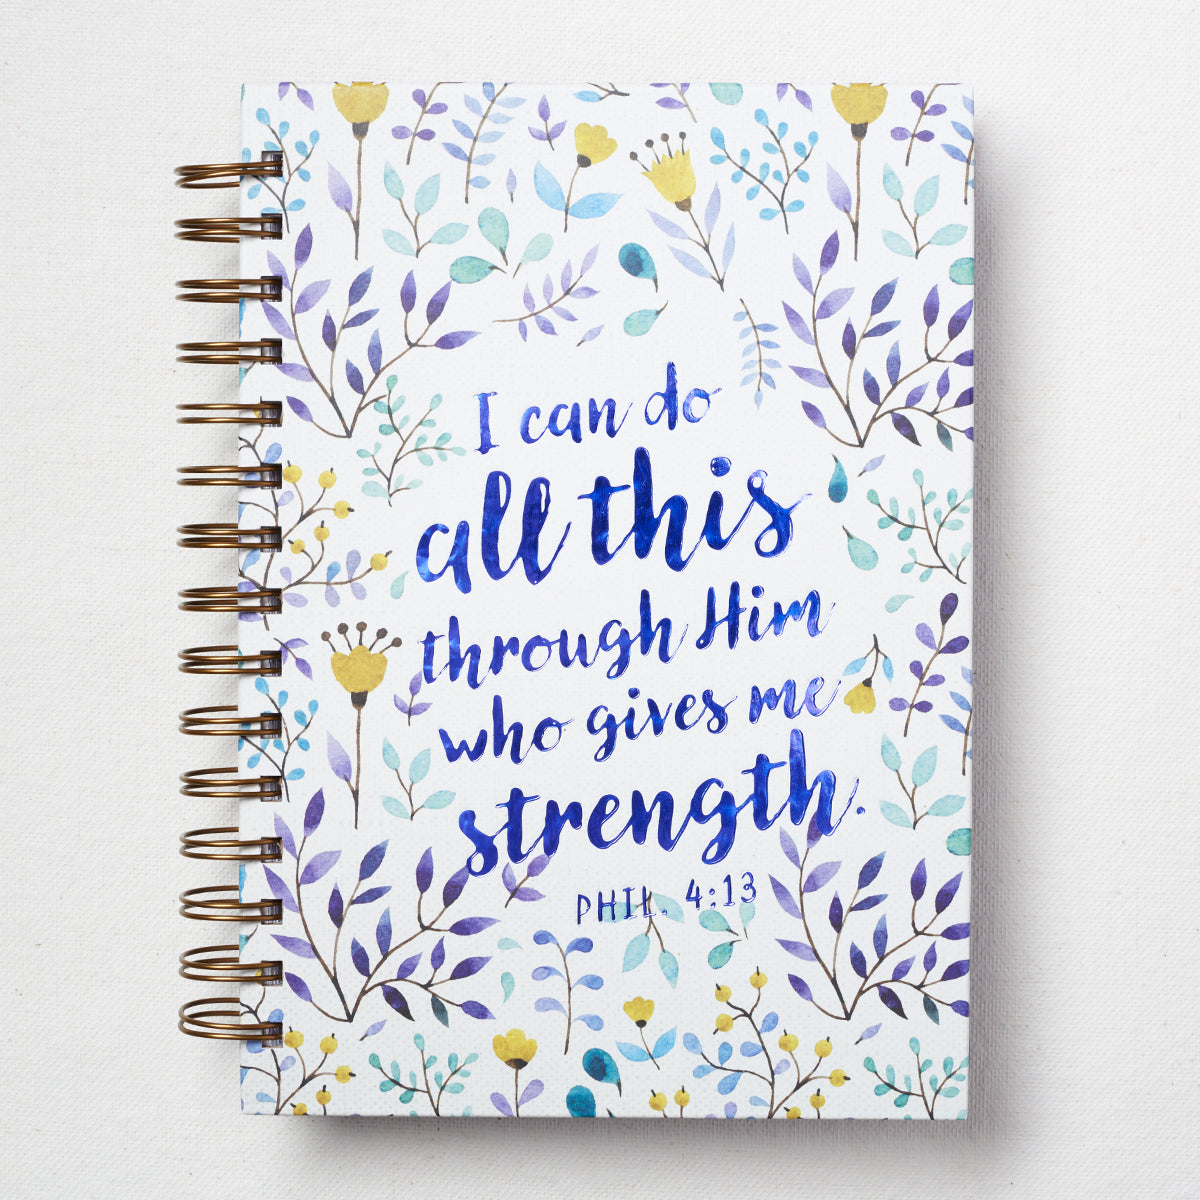 I Can Do All This Large Wirebound Hardcover Journal - Philippians 4:13 - The Christian Gift Company